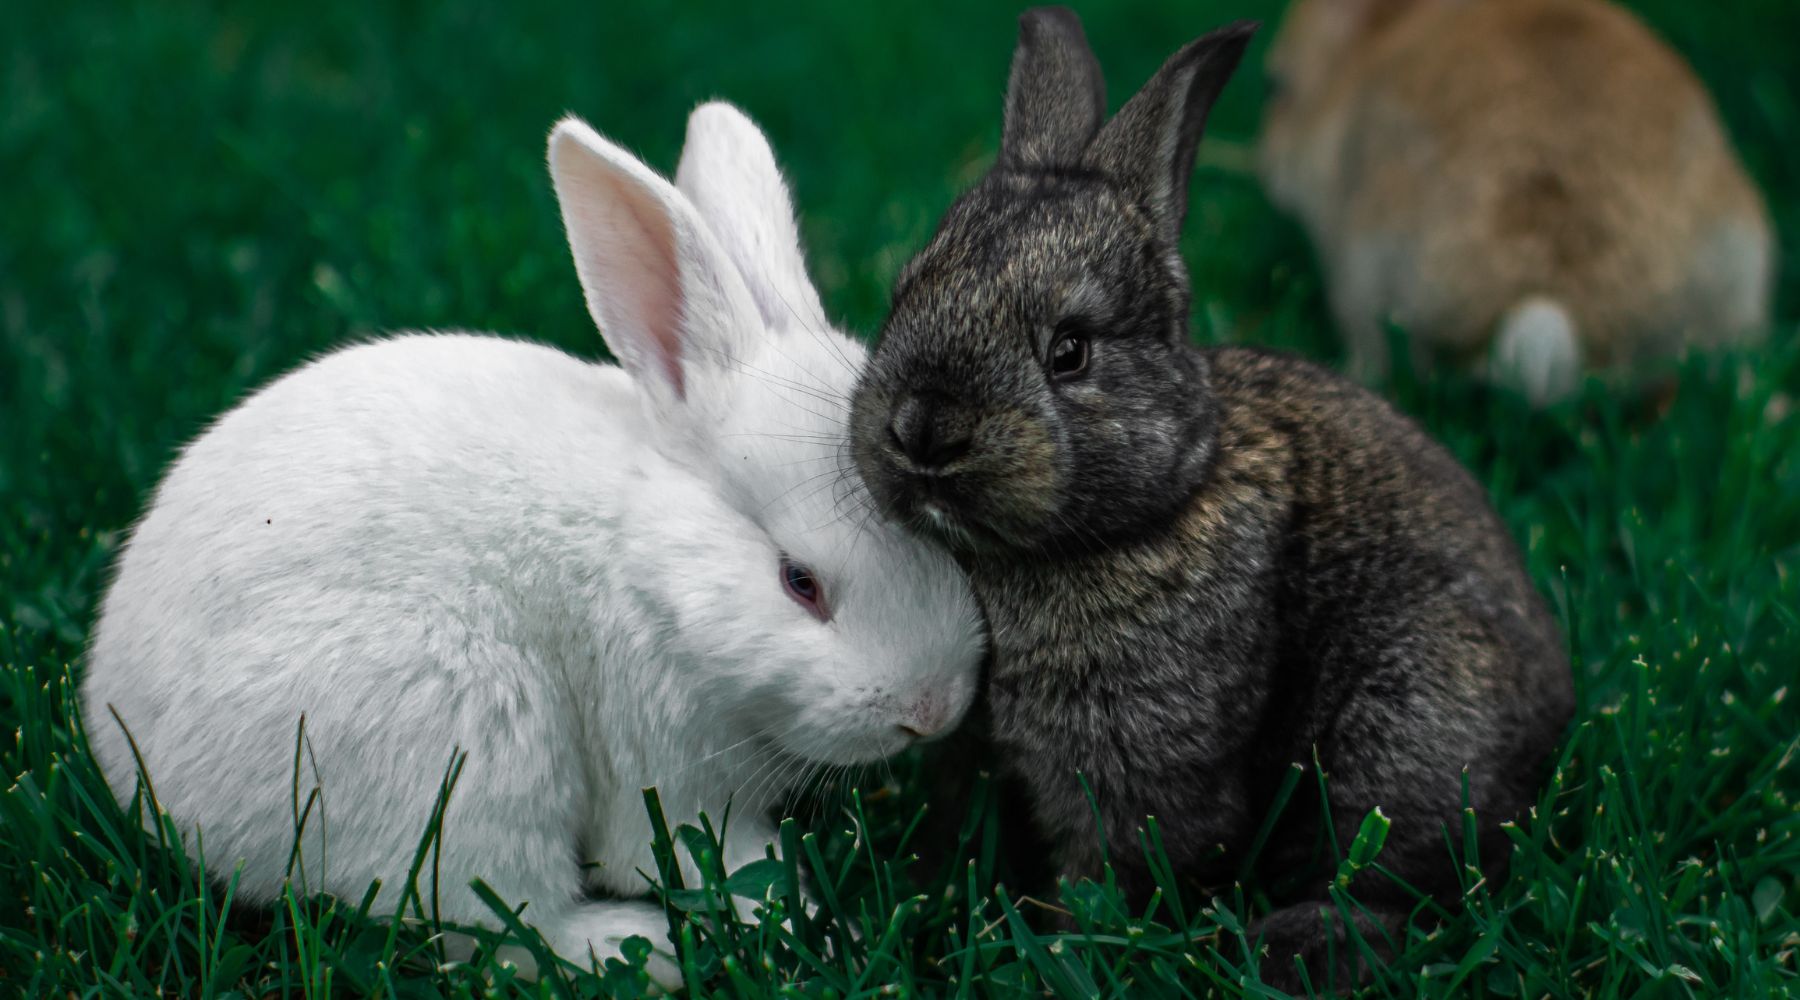 Two rabbits next to each other